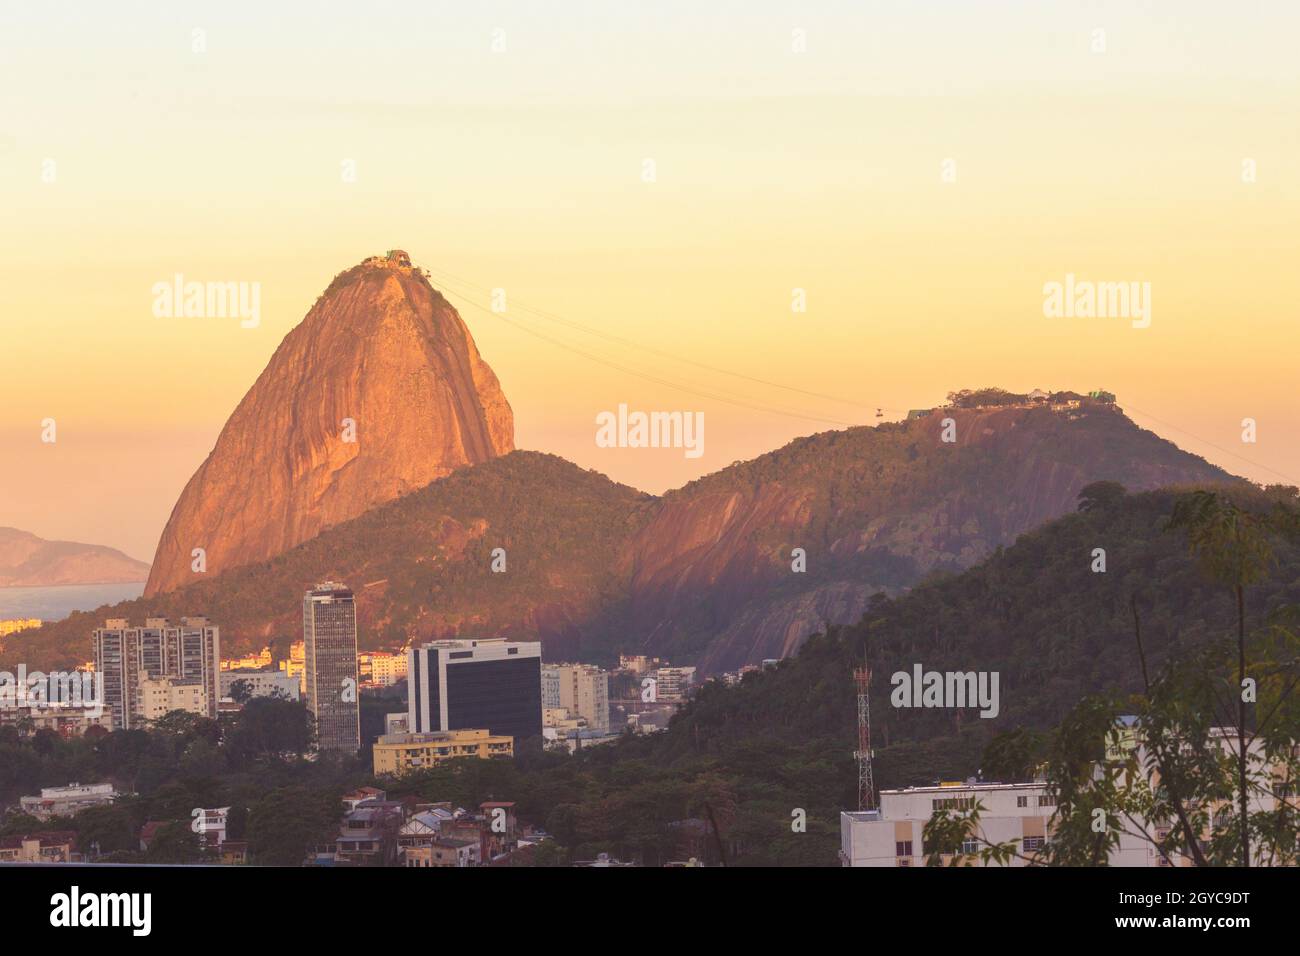 Aerial view surrounded by the sea and hills in brazil Stock Photo